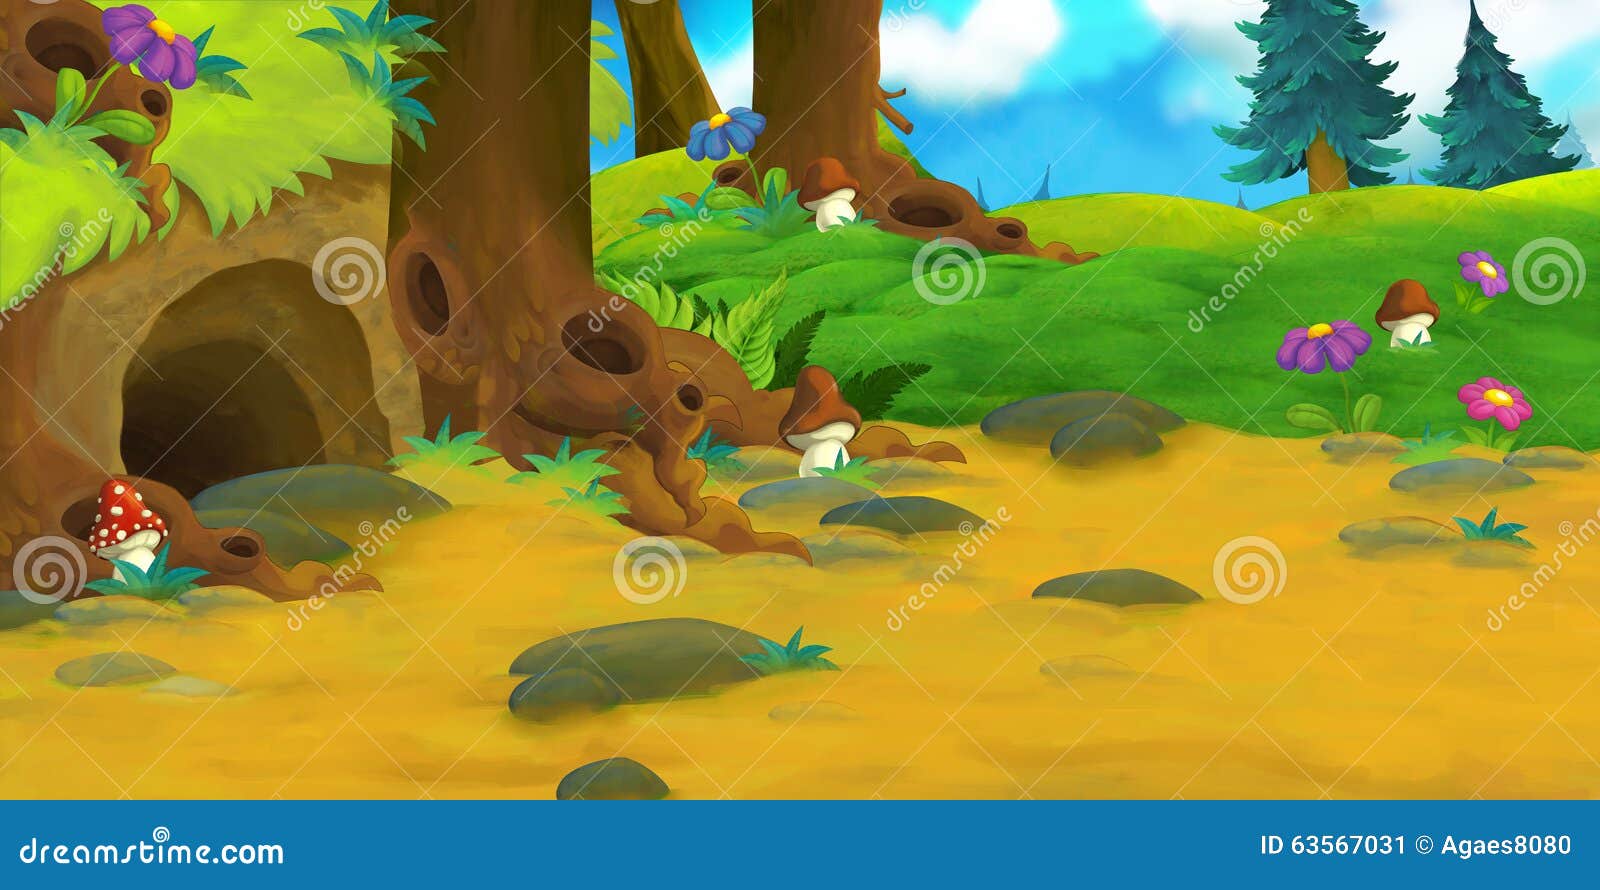 Cartoon Background of a Forest Stock Illustration - Illustration of plants,  colorful: 63567031